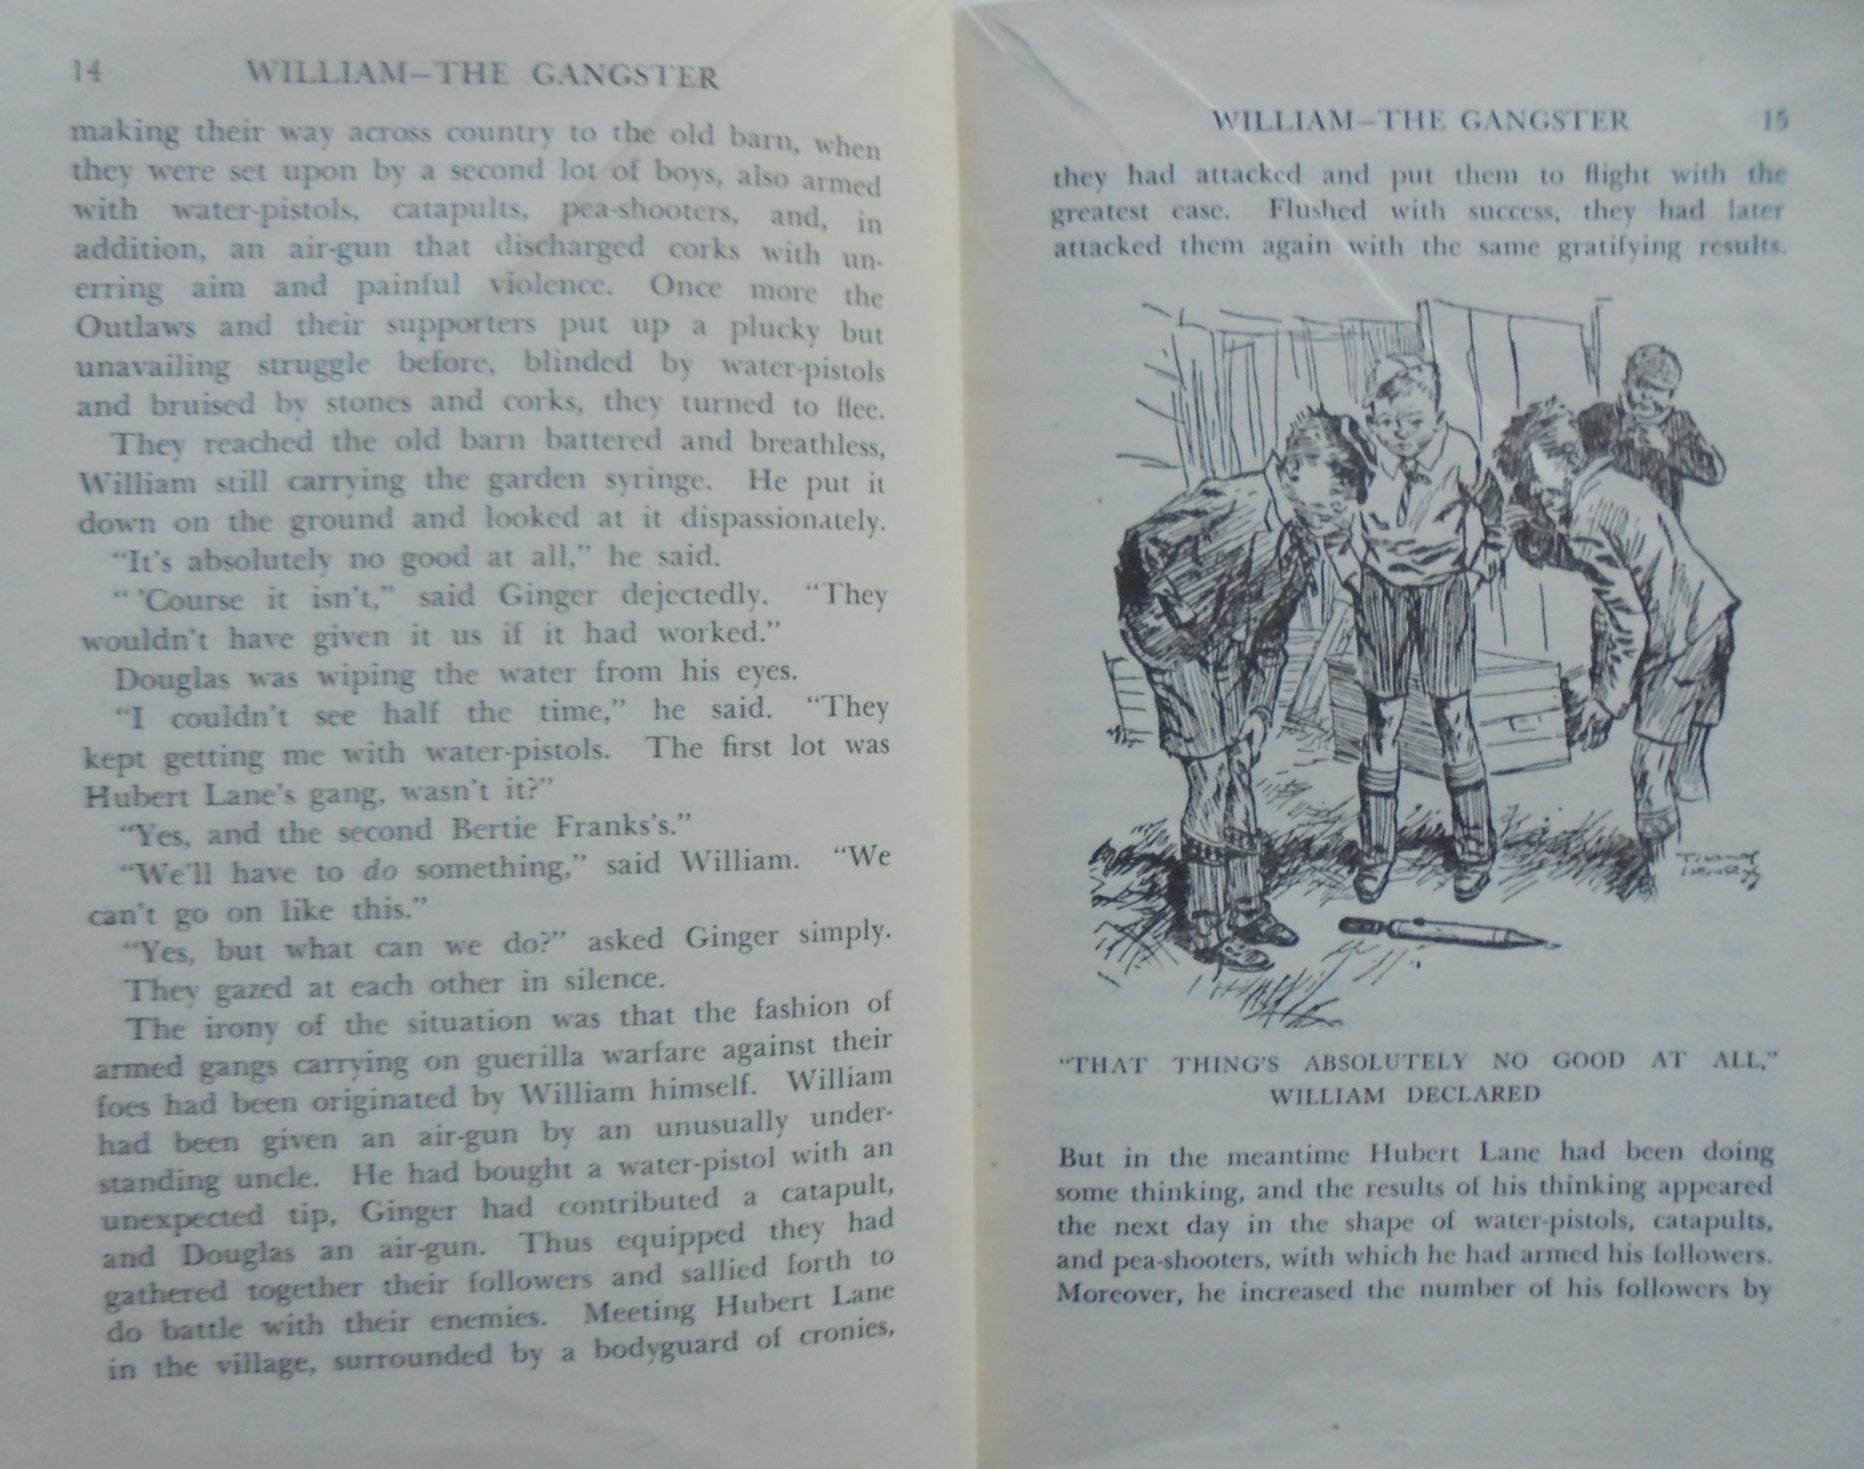 William The Gangster. By Richmal Crompton (1950) 1st edition